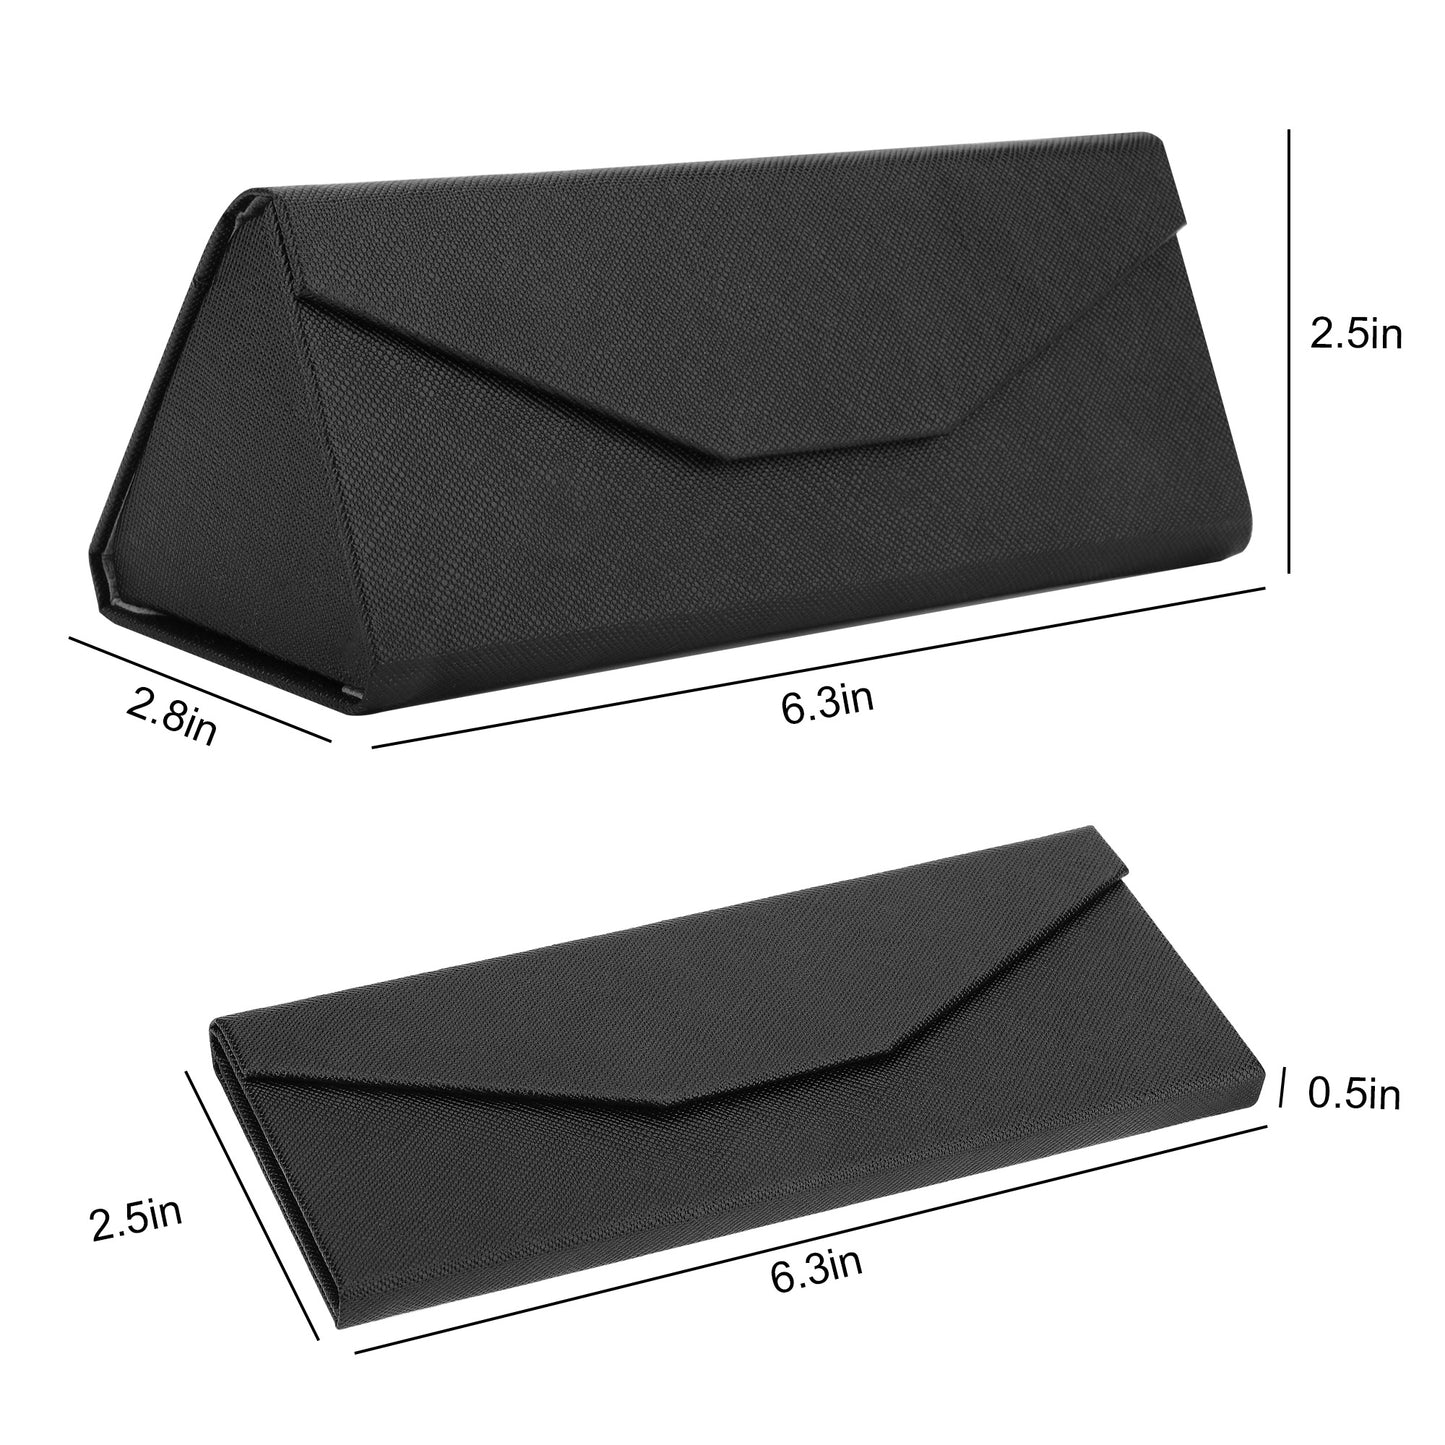 Collapsible Triangle Eyewear Glasses Case - Compact and durable glasses storage for travel and everyday use, protective and versatile, can store sunglasses, reading glasses and more